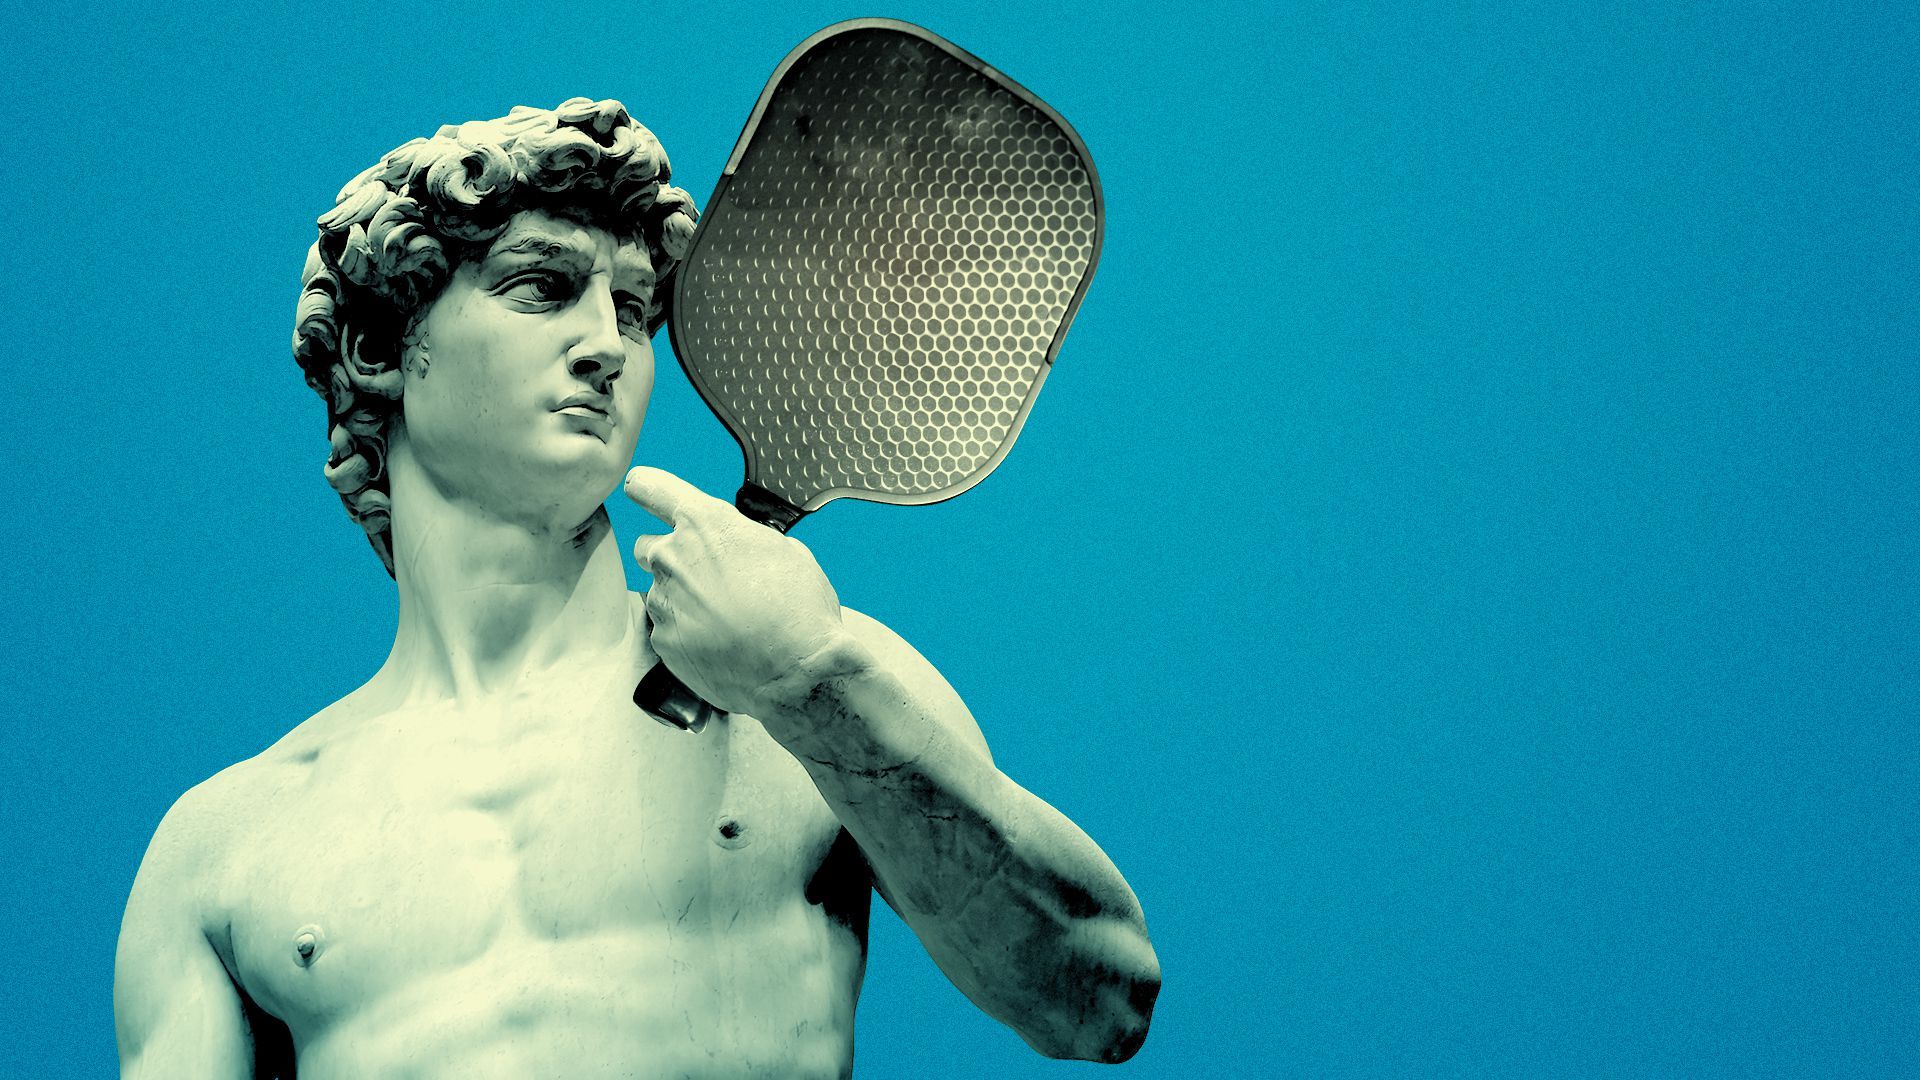 Photo illustration of Michelangelo's Statue of David holding a pickleball paddle.